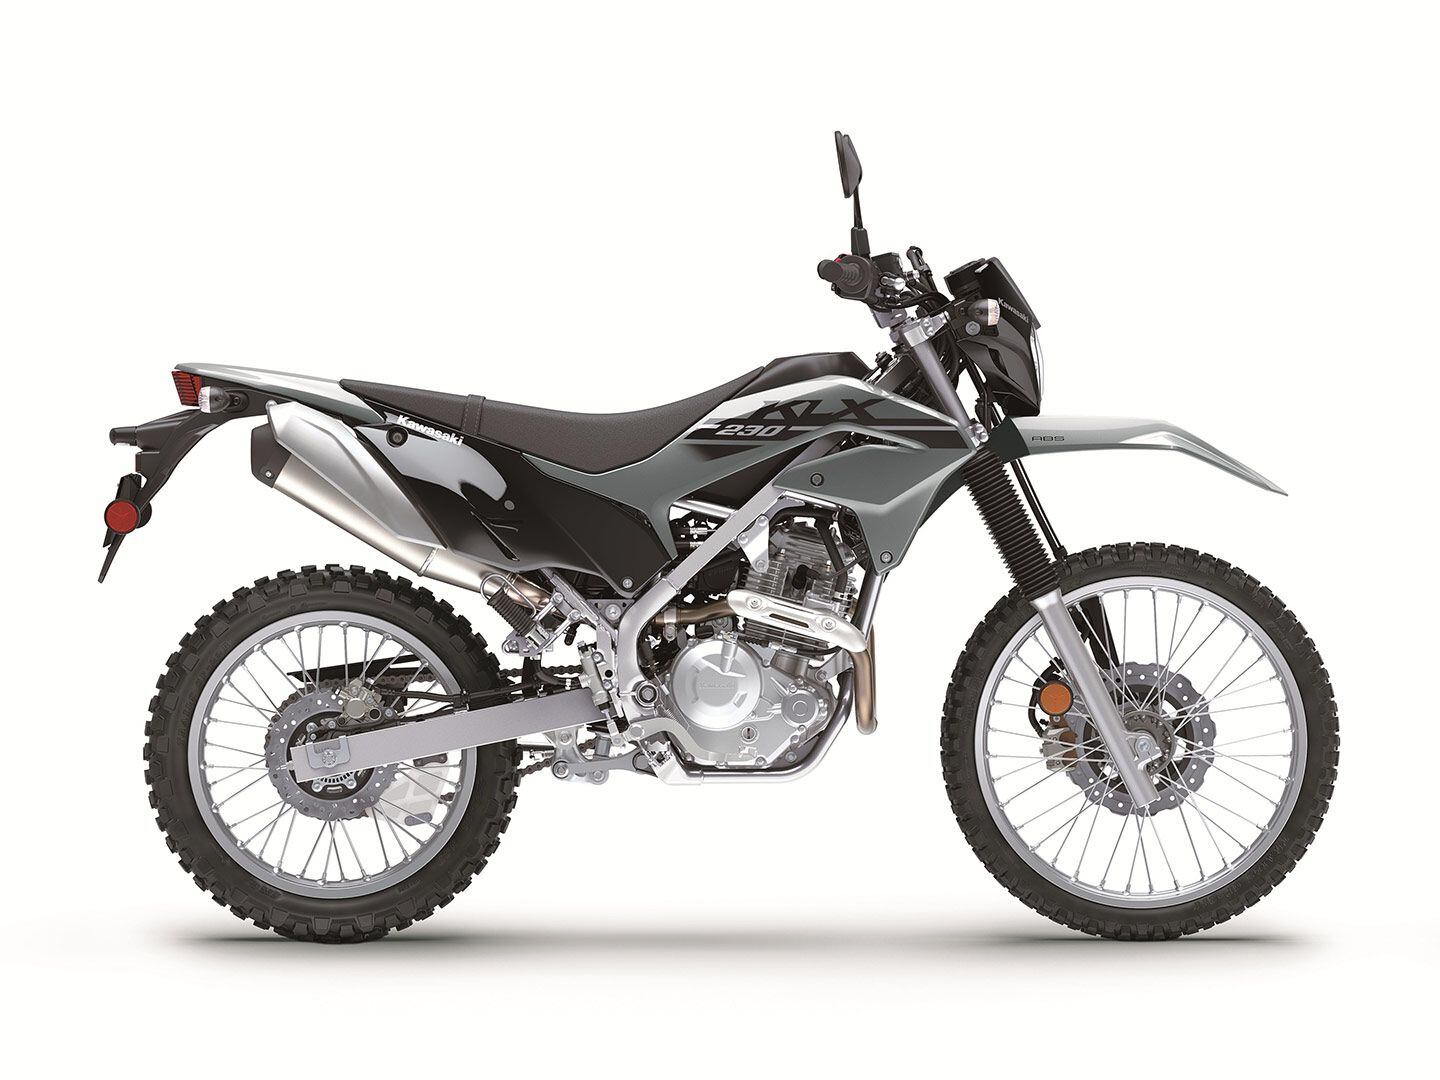 The KLX230 is the smallest-displacement model in Kawasaki’s dual sport lineup, which also includes the KLX300. A KLX230 S is available with lower seat height.